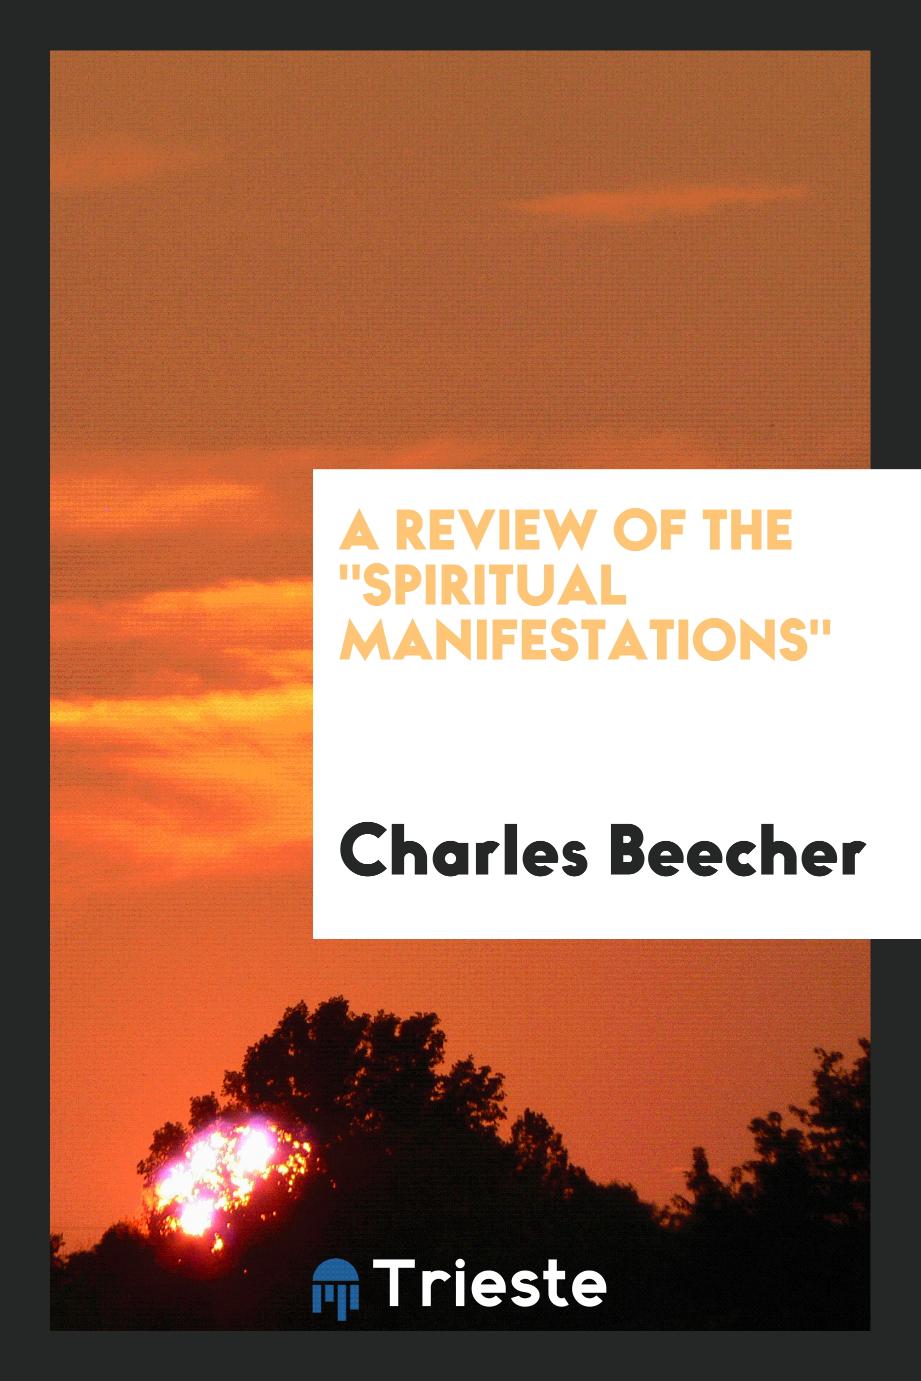 A Review of the "Spiritual Manifestations"